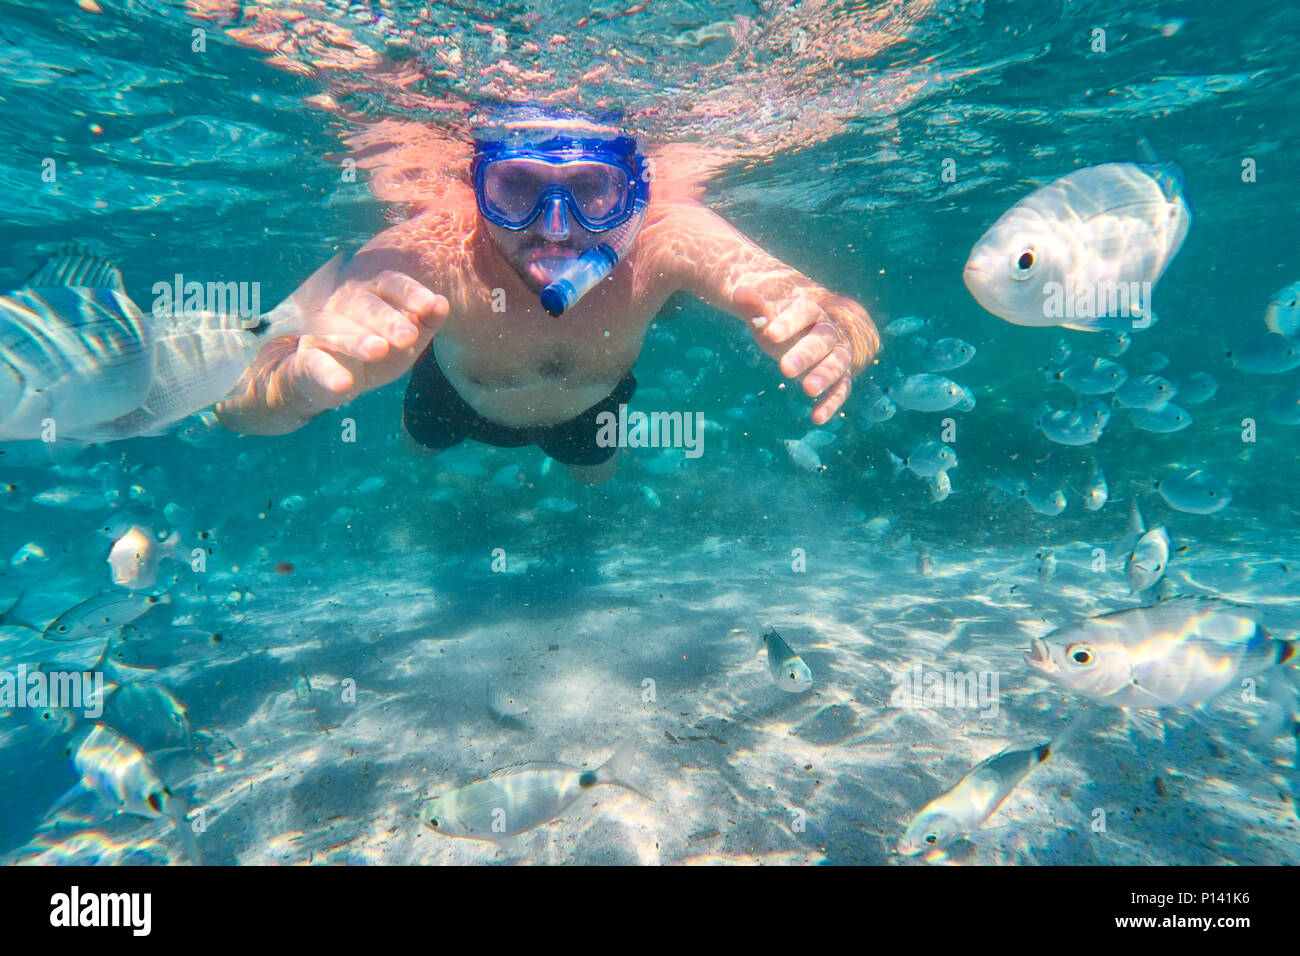 Young man snorkeling in underwater coral reef on tropical island. Stock Photo